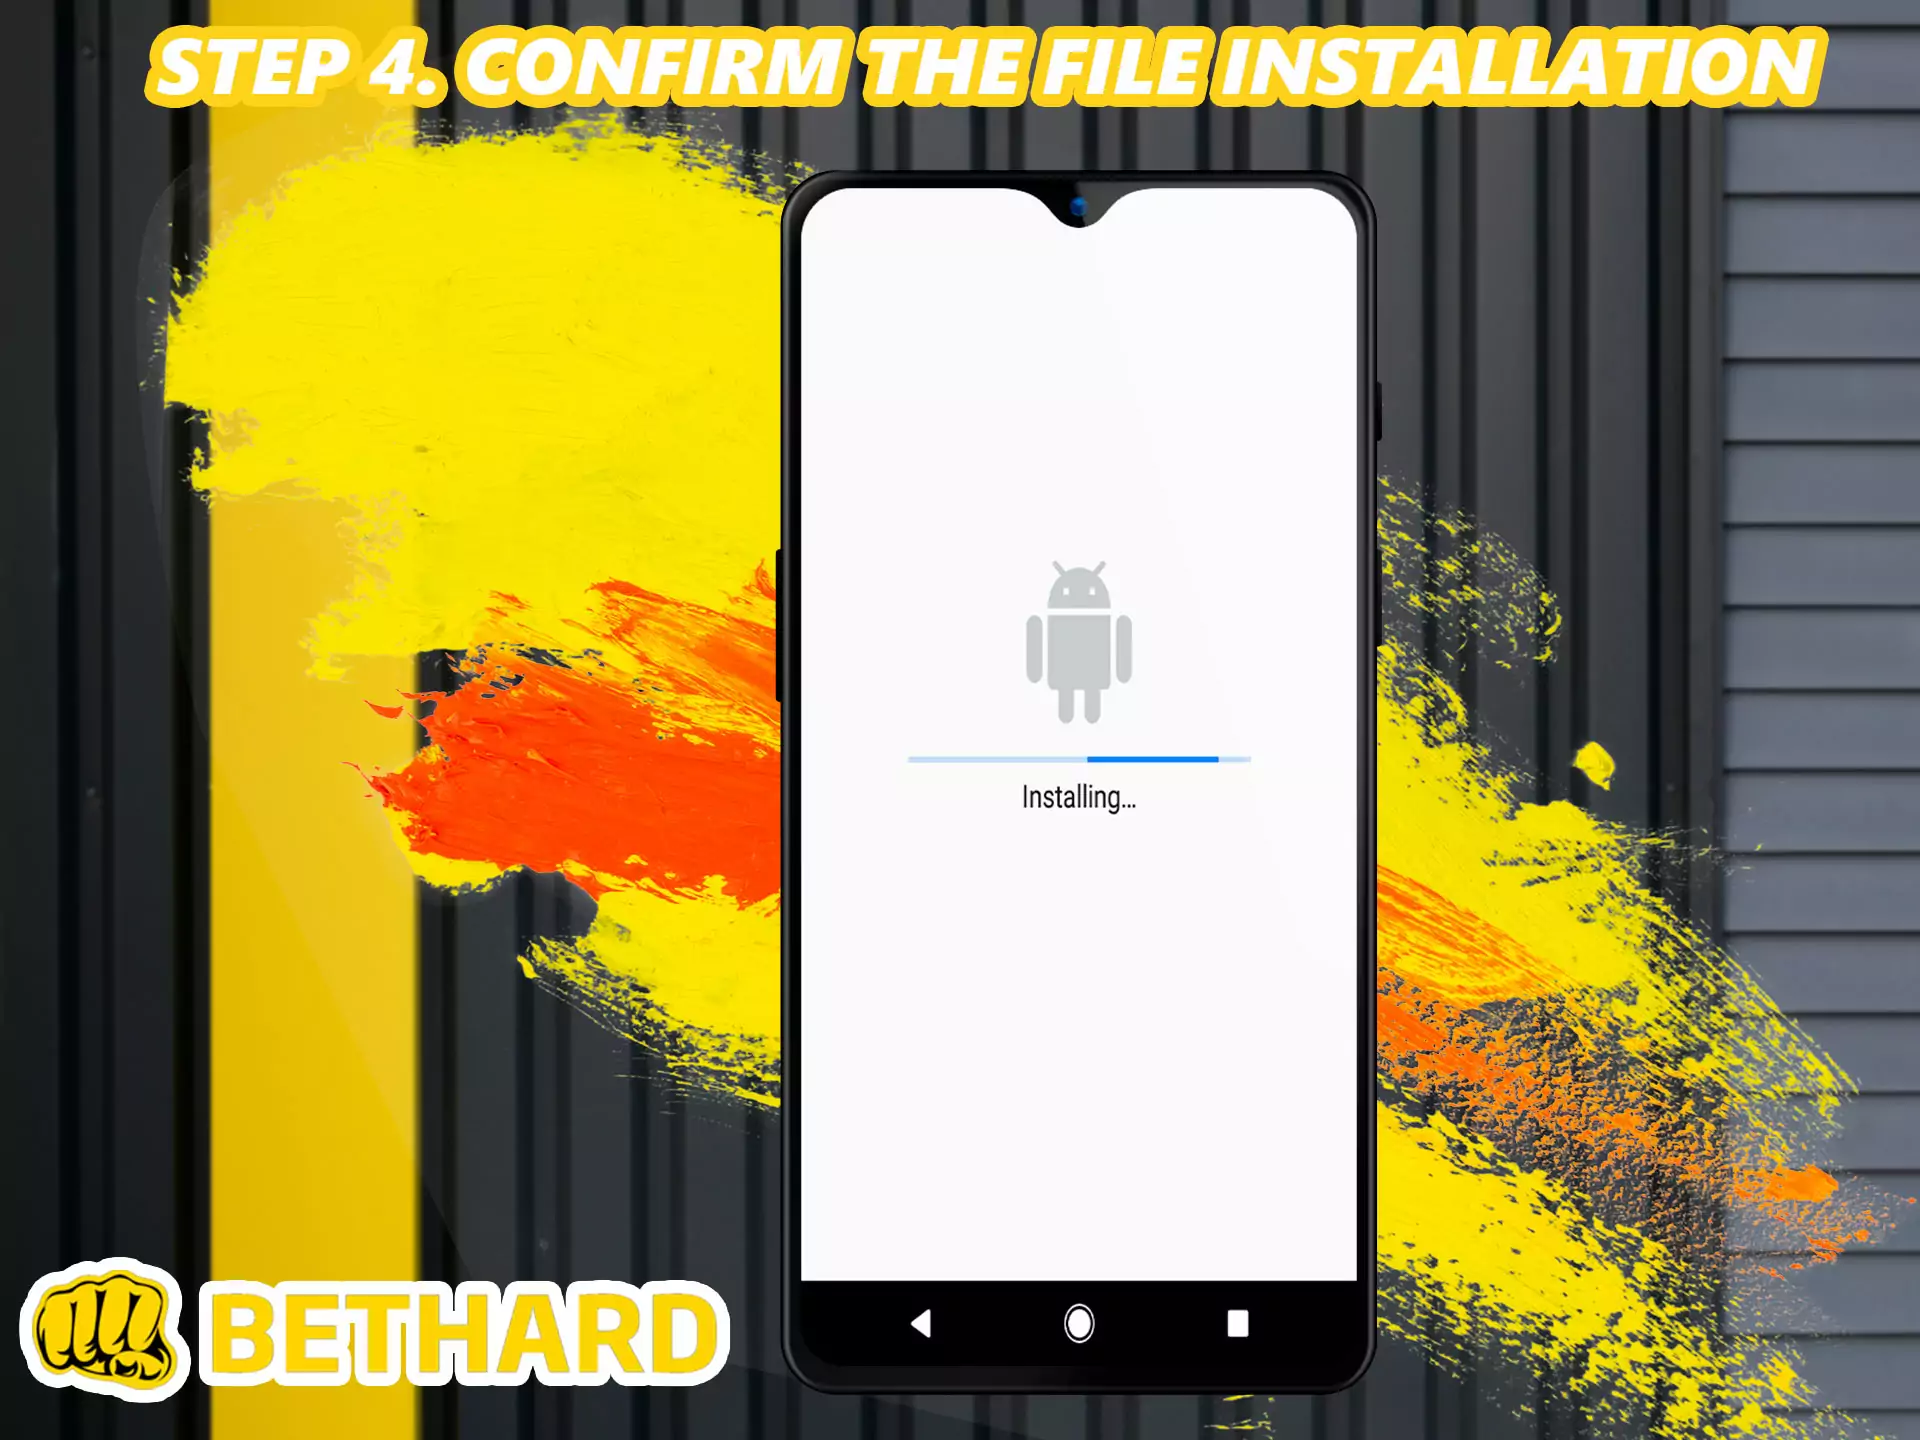 Run the previously downloaded setup file and wait for the installation process to complete.